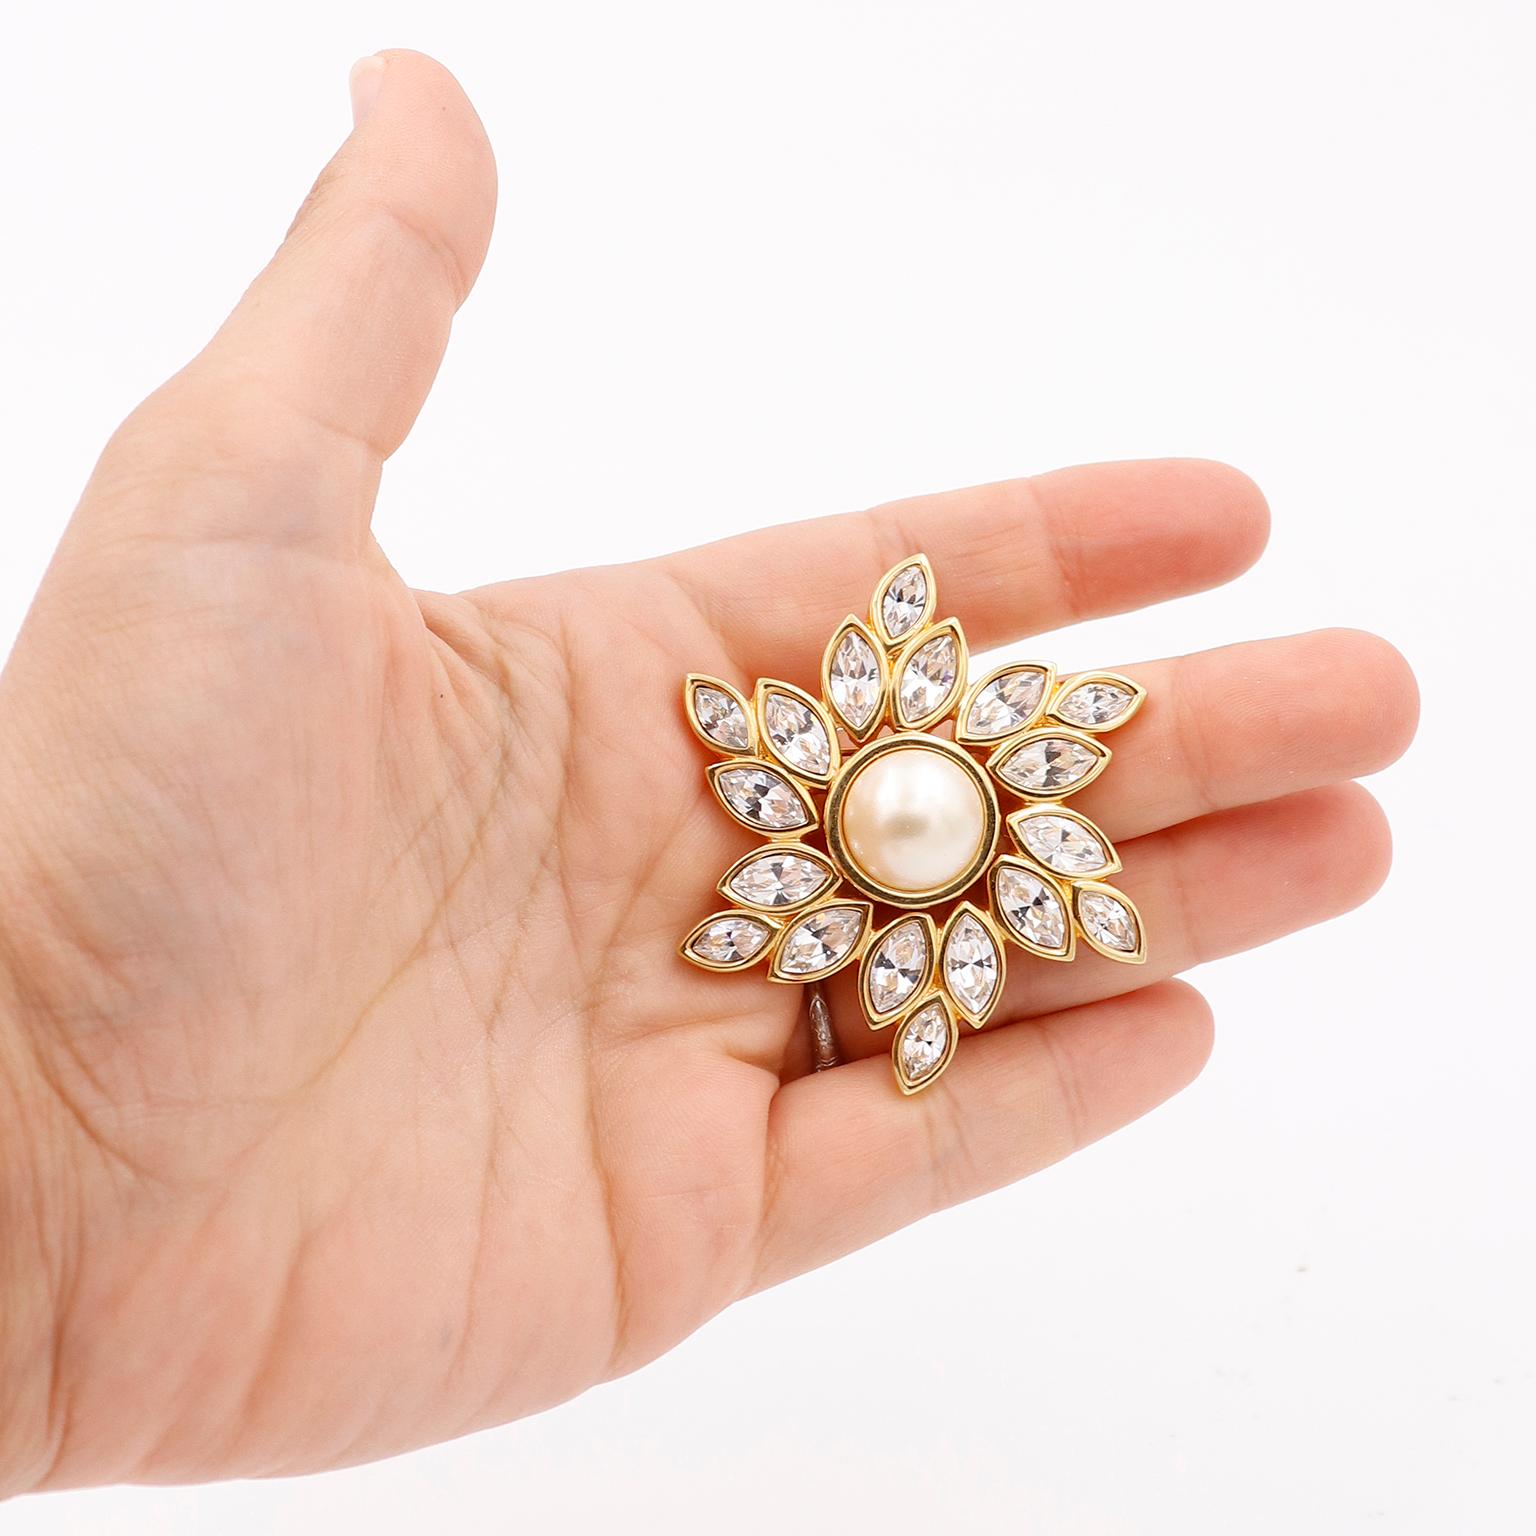 This gorgeous gold plated Swarovski crystal brooch is a star shaped flower with a faux pearl center. The brooch is marked with the Swarovski 